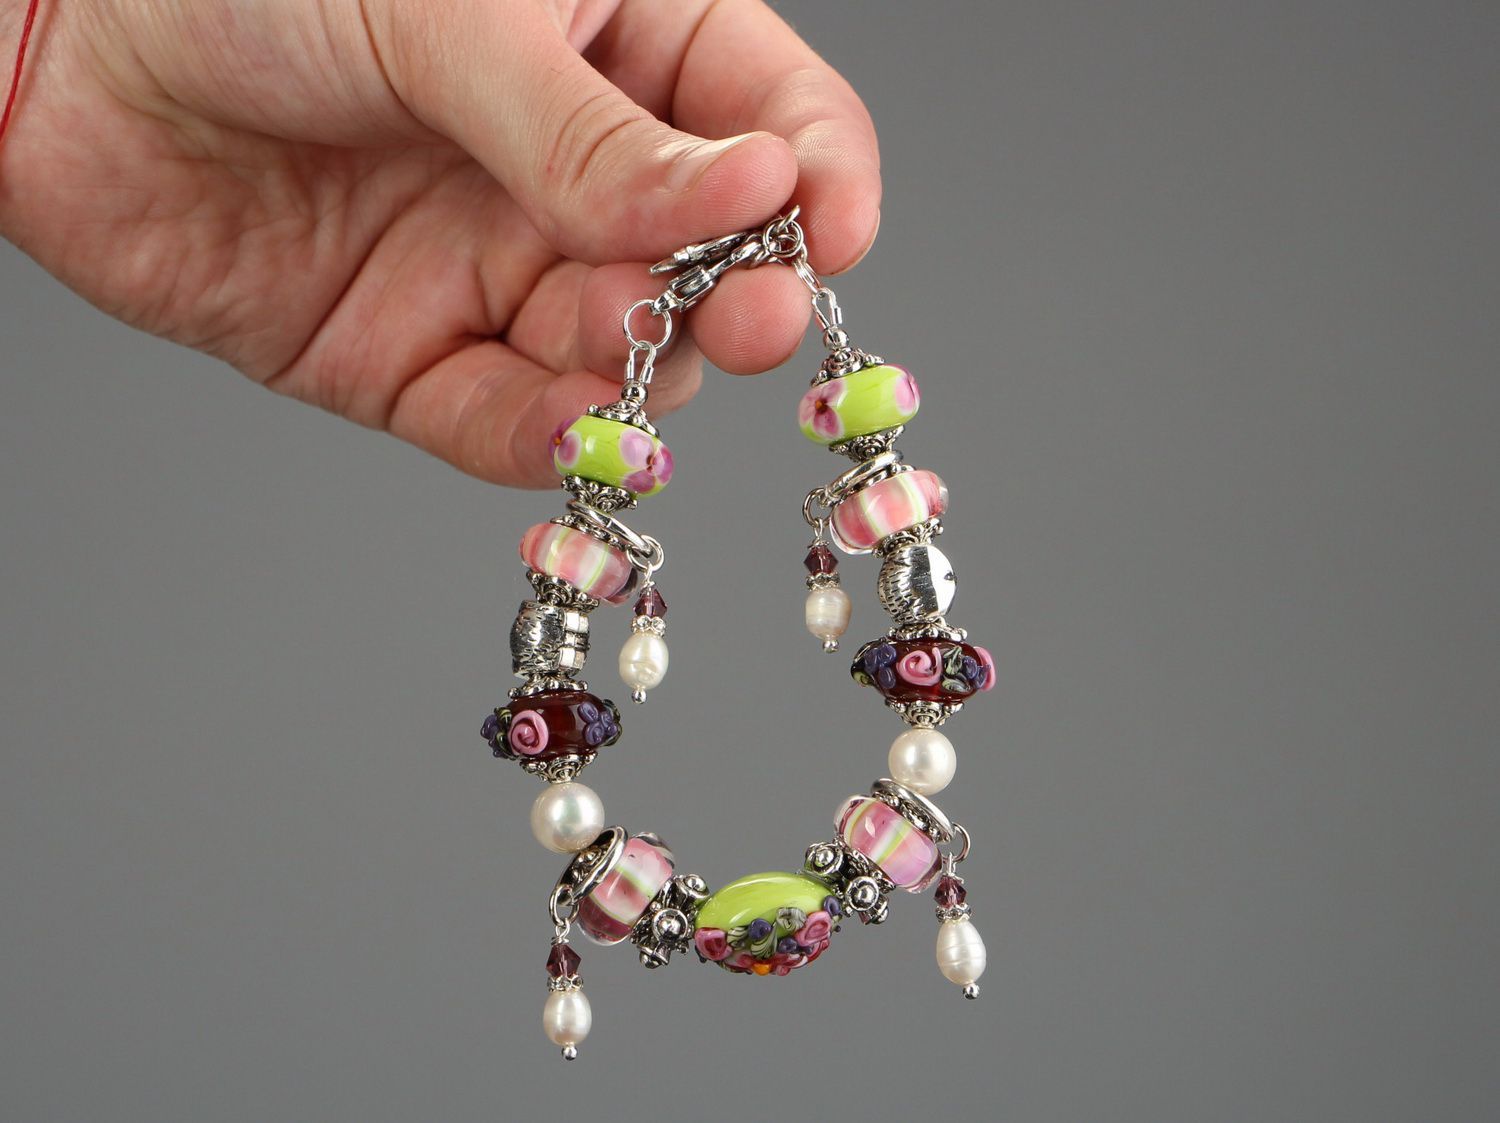 Bracelet made from glass and pearls Garden of Eden photo 5